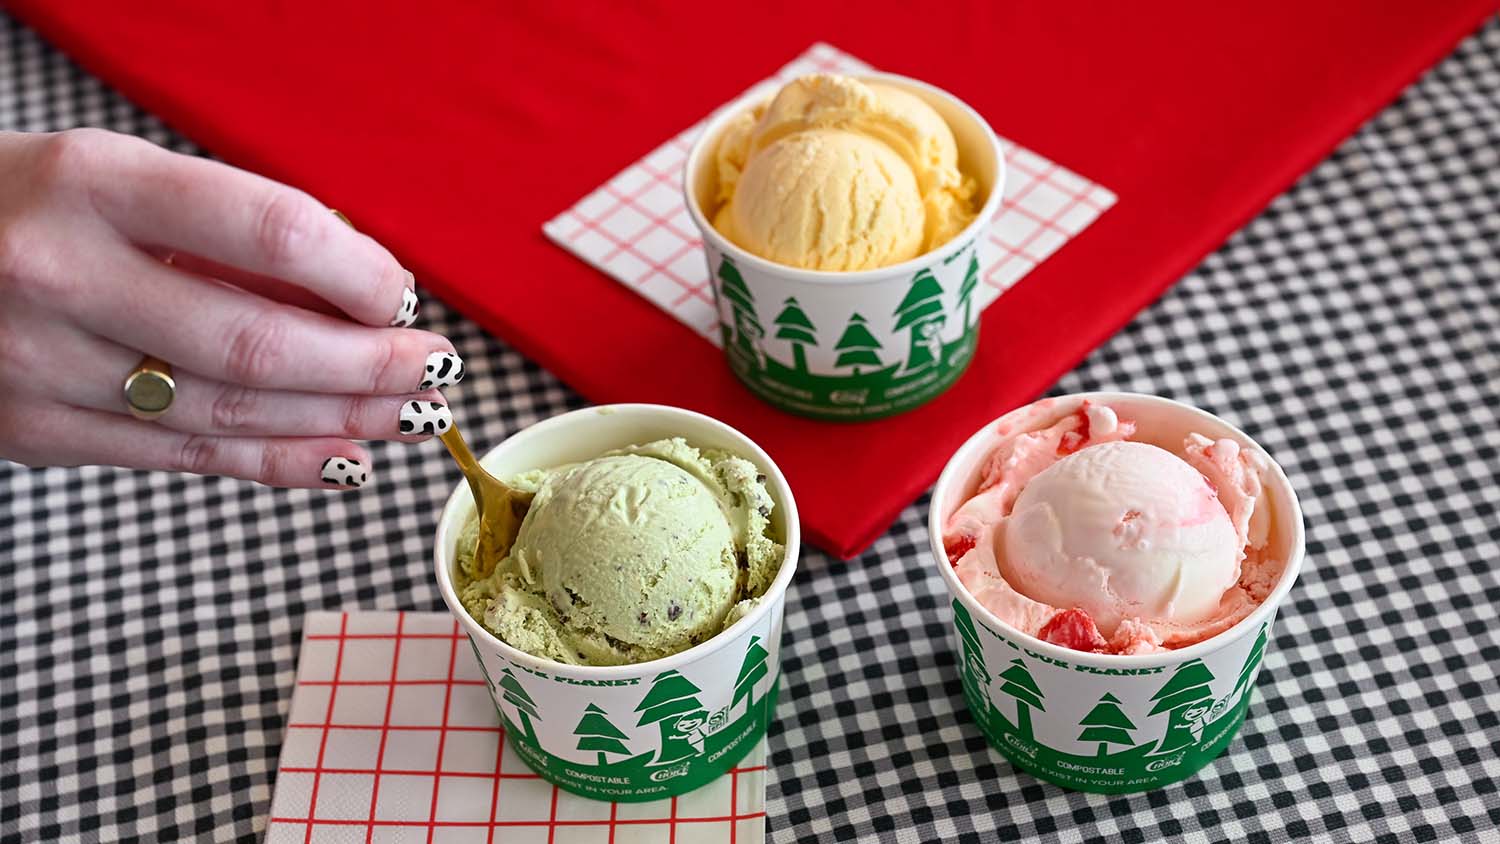 Scoops of lemon-, strawberry- and mint-flavored Howling Cow ice cream.